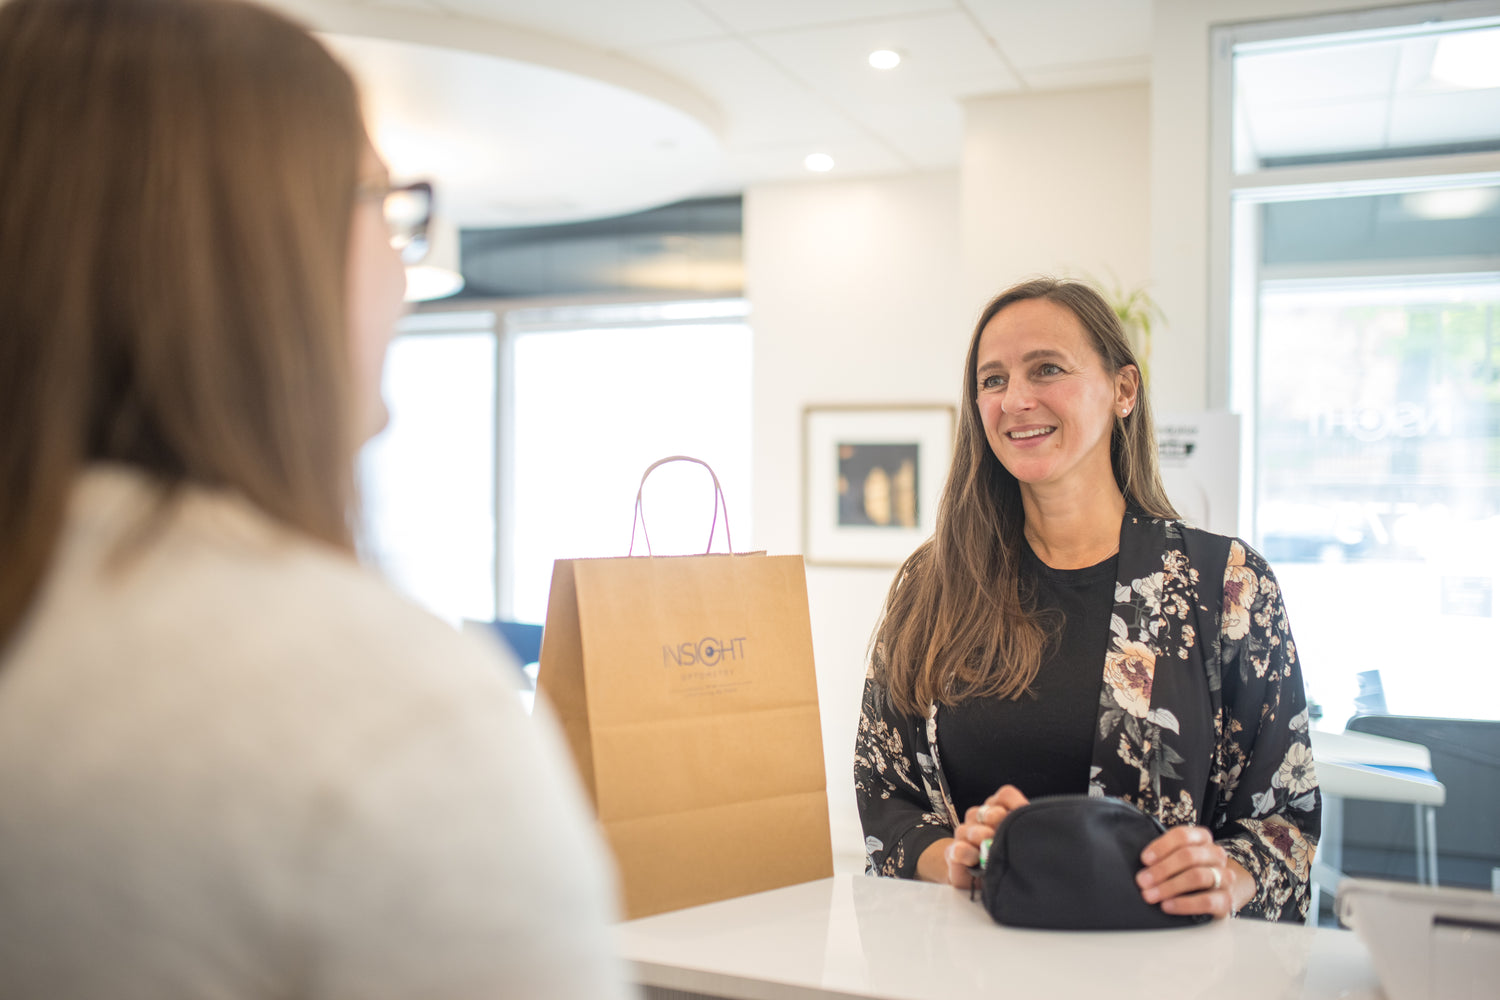 A female customer is being greeted by a reception team member after her appointment. A brown bag with the Insight Optometry logo is located beside the customer.